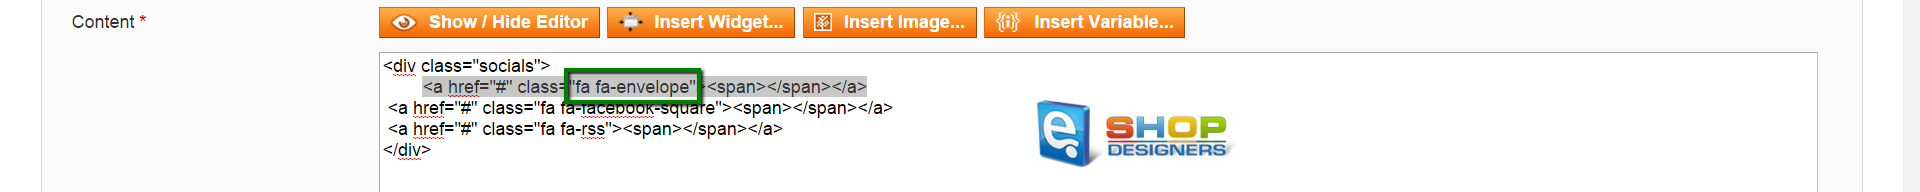 Magento_fontawesome_social_icons_block_4